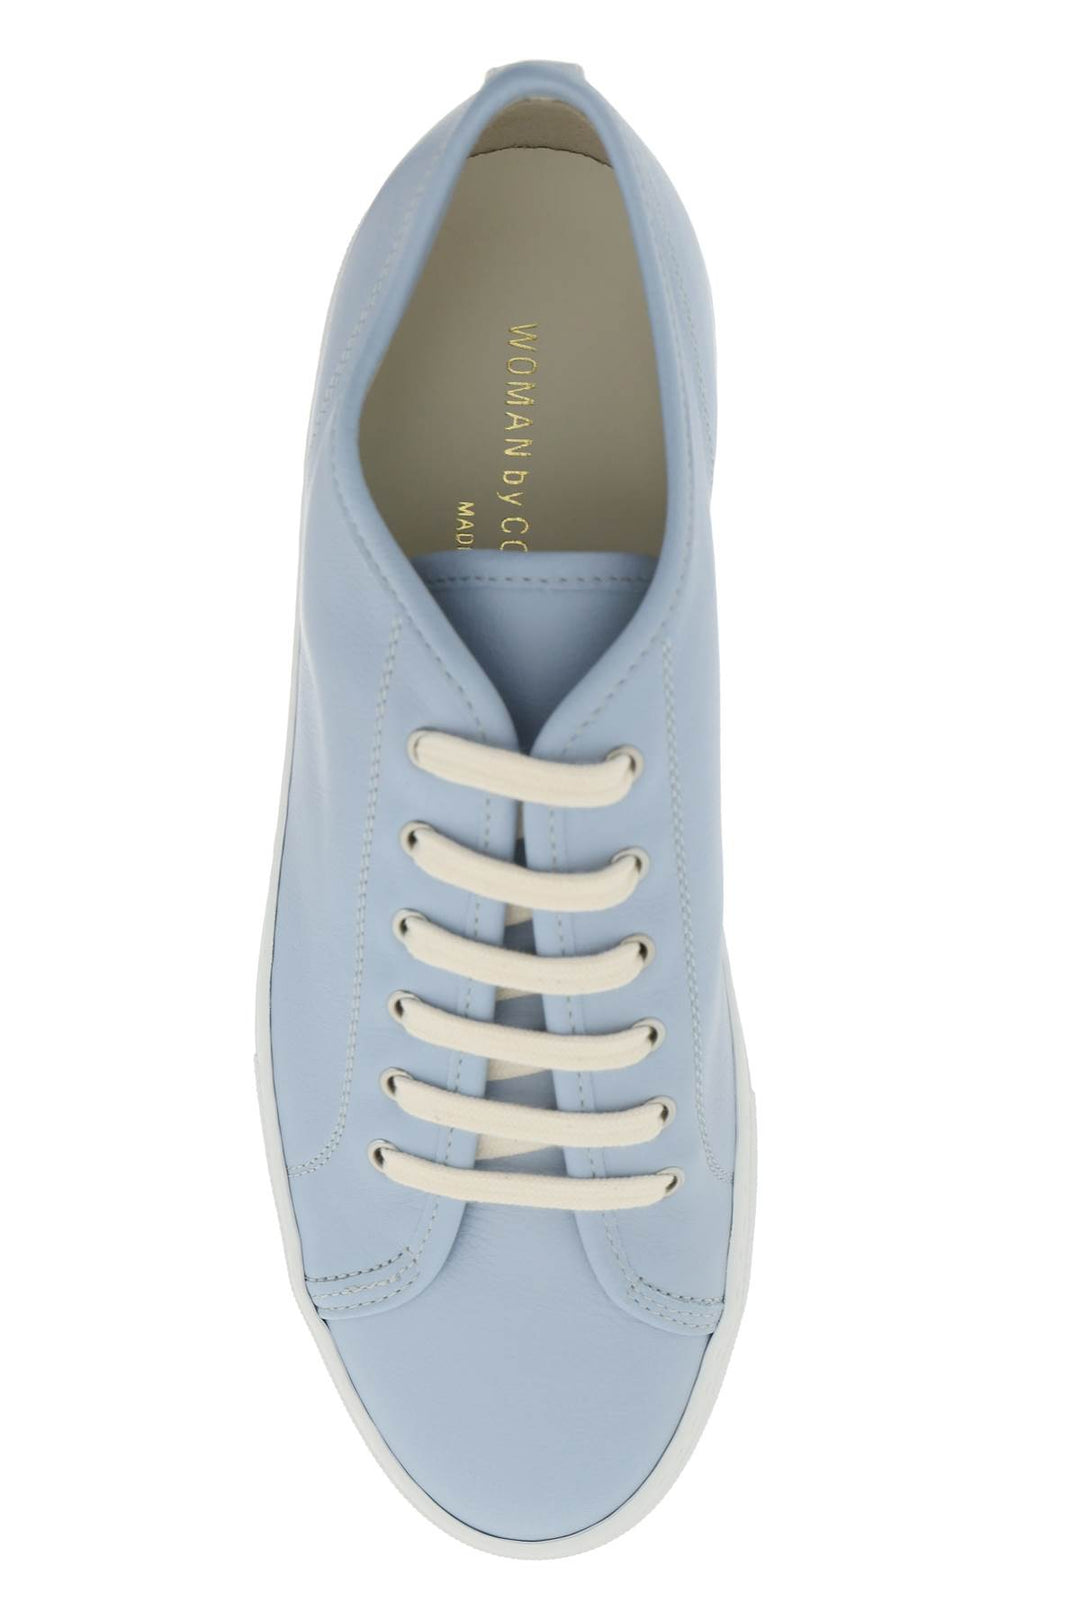 Common Projects Leather Tournament Low Super Sneakers   Light Blue